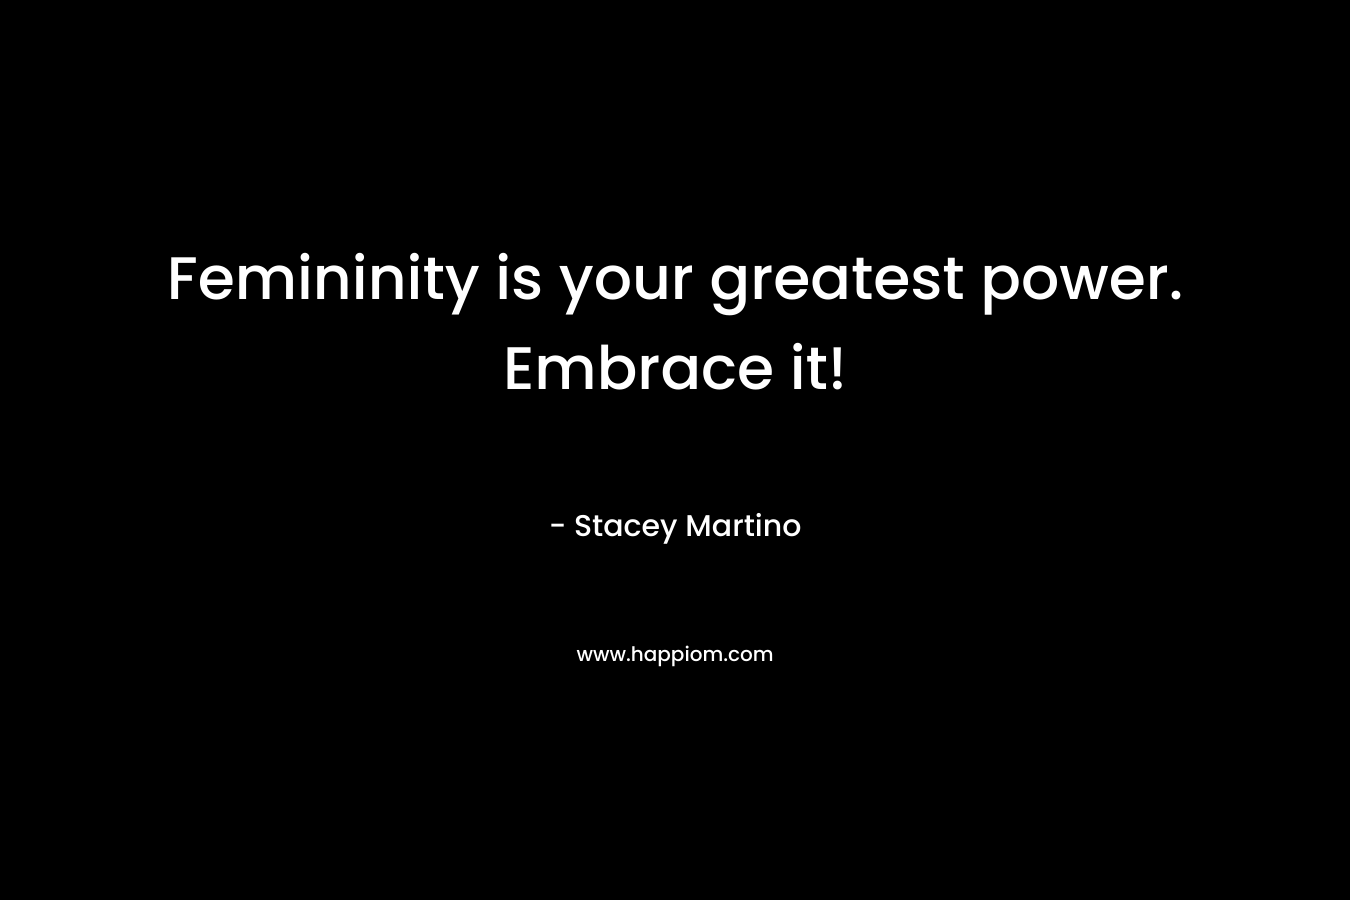 Femininity is your greatest power. Embrace it! – Stacey Martino